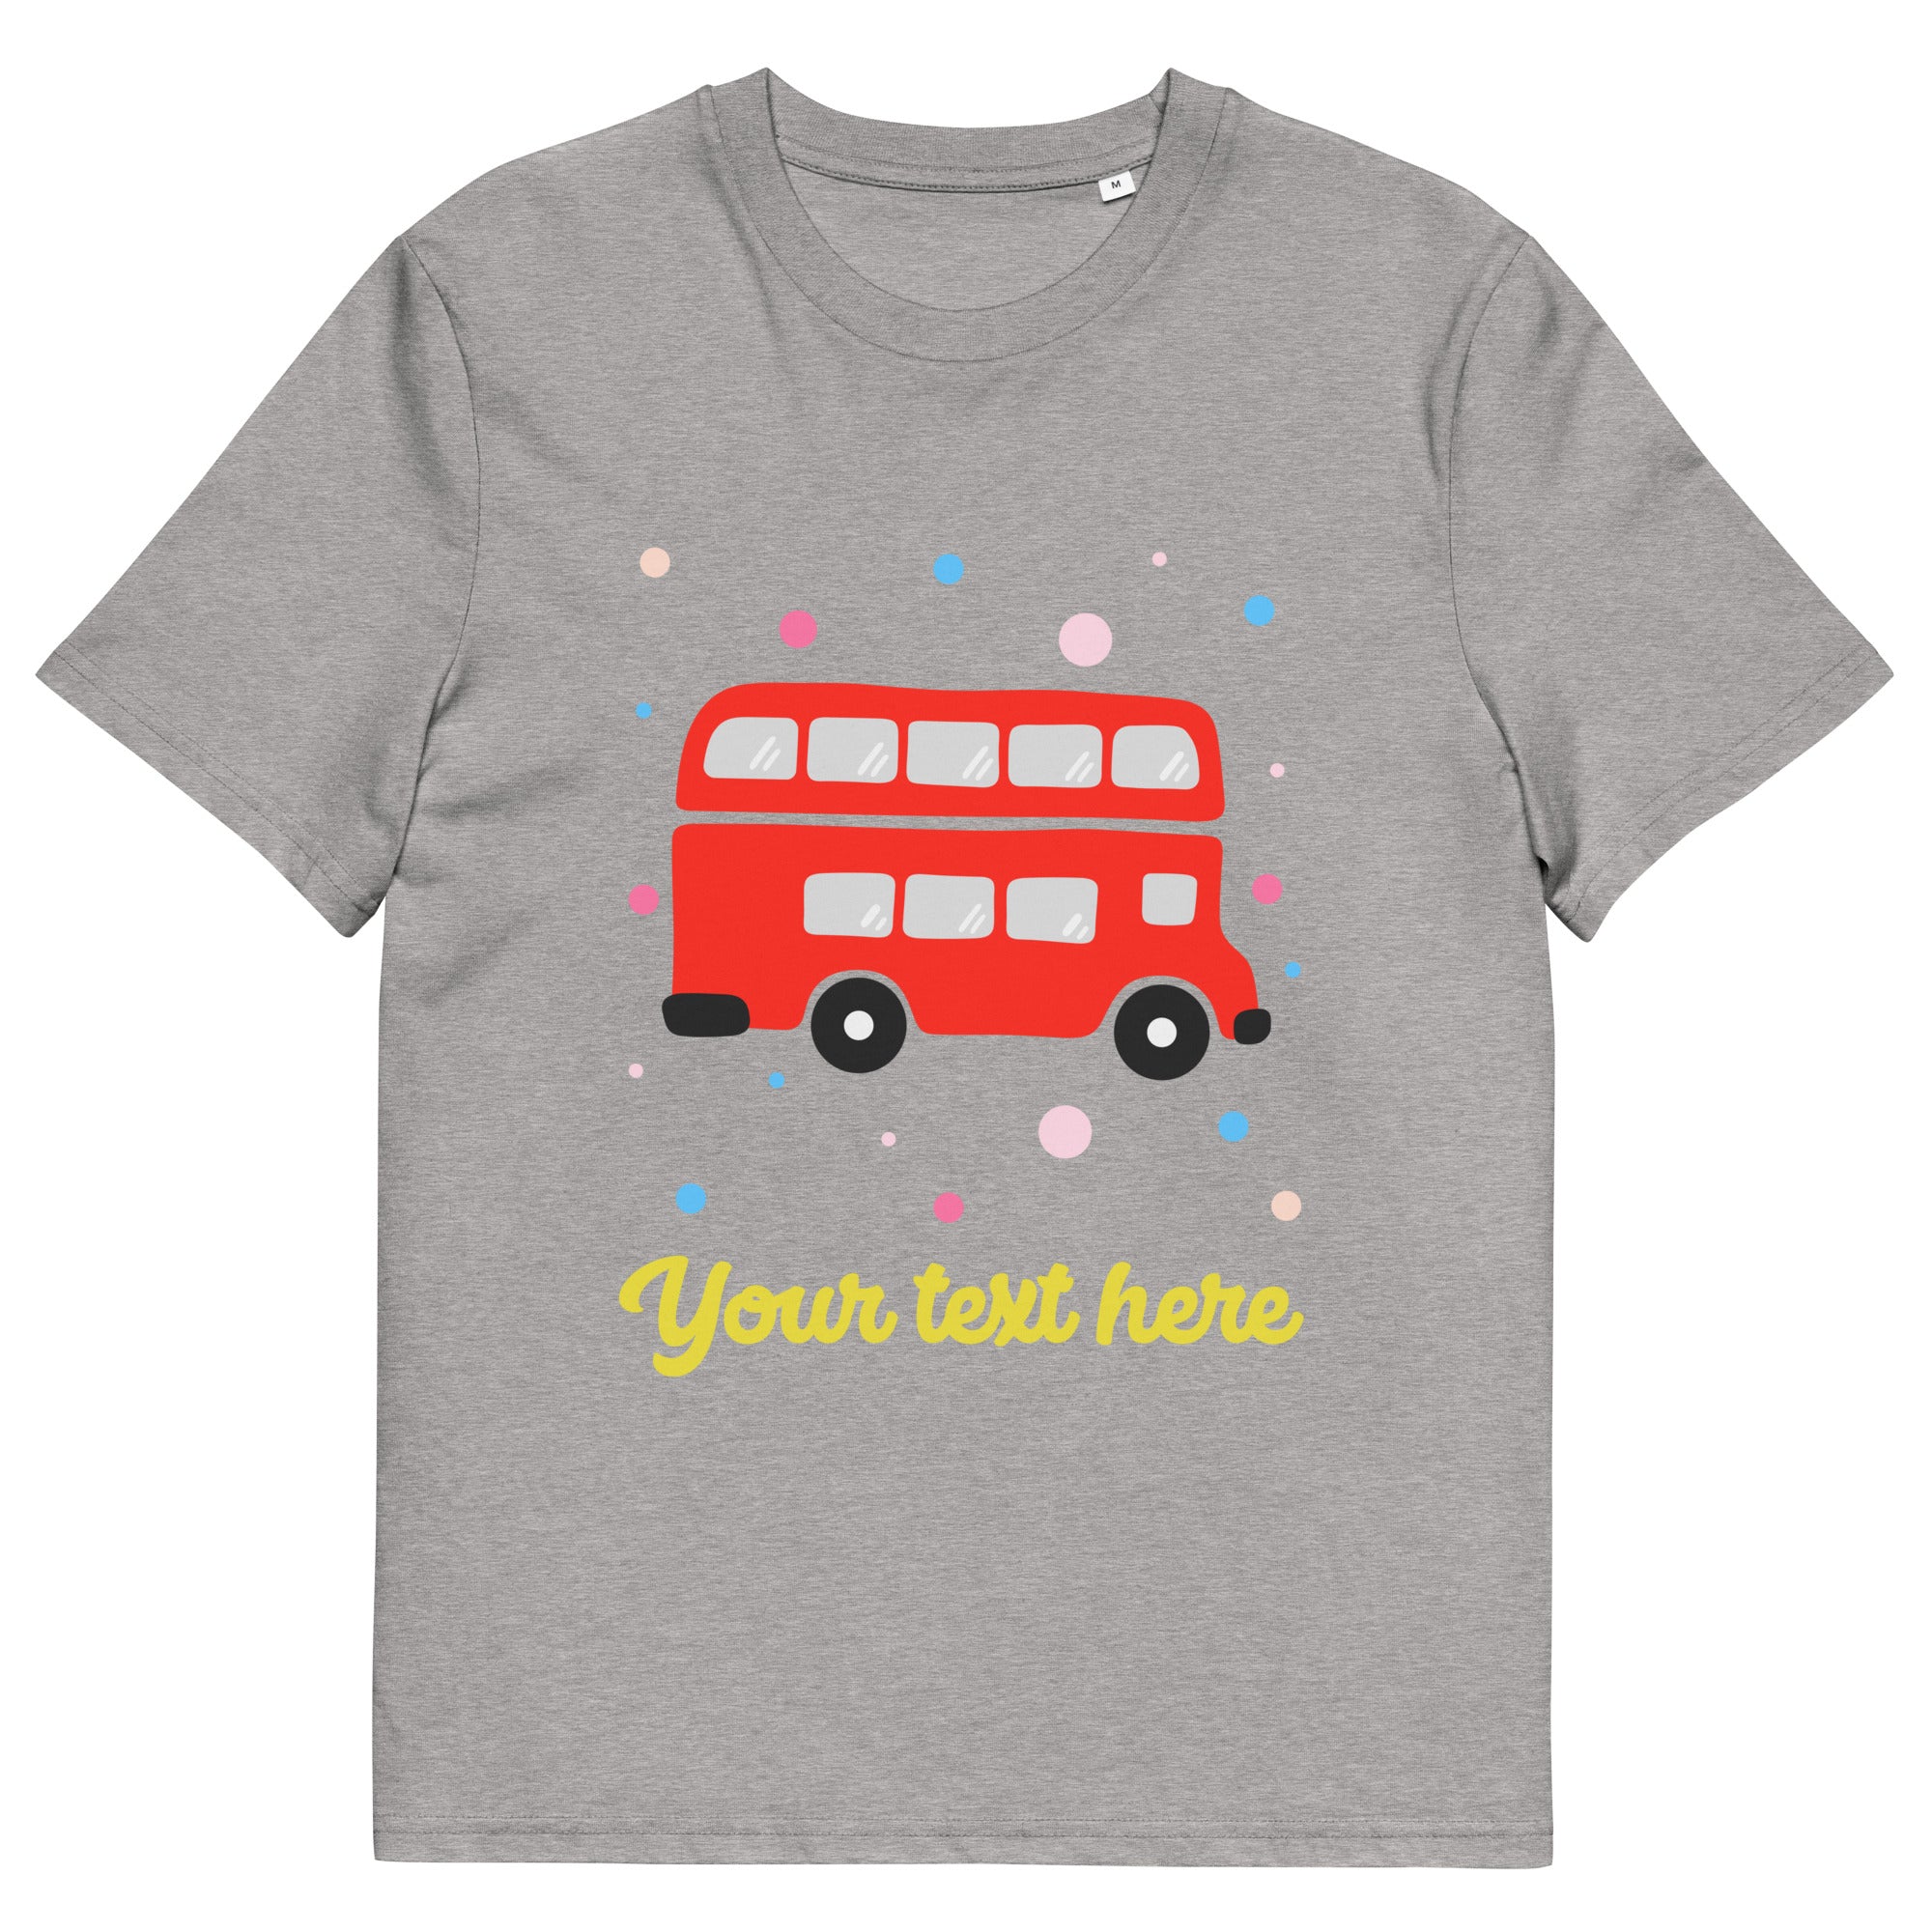 Personalised Custom Text - Organic Cotton Adults Unisex T-Shirt - London Doodles - Red Bus - Heather Grey